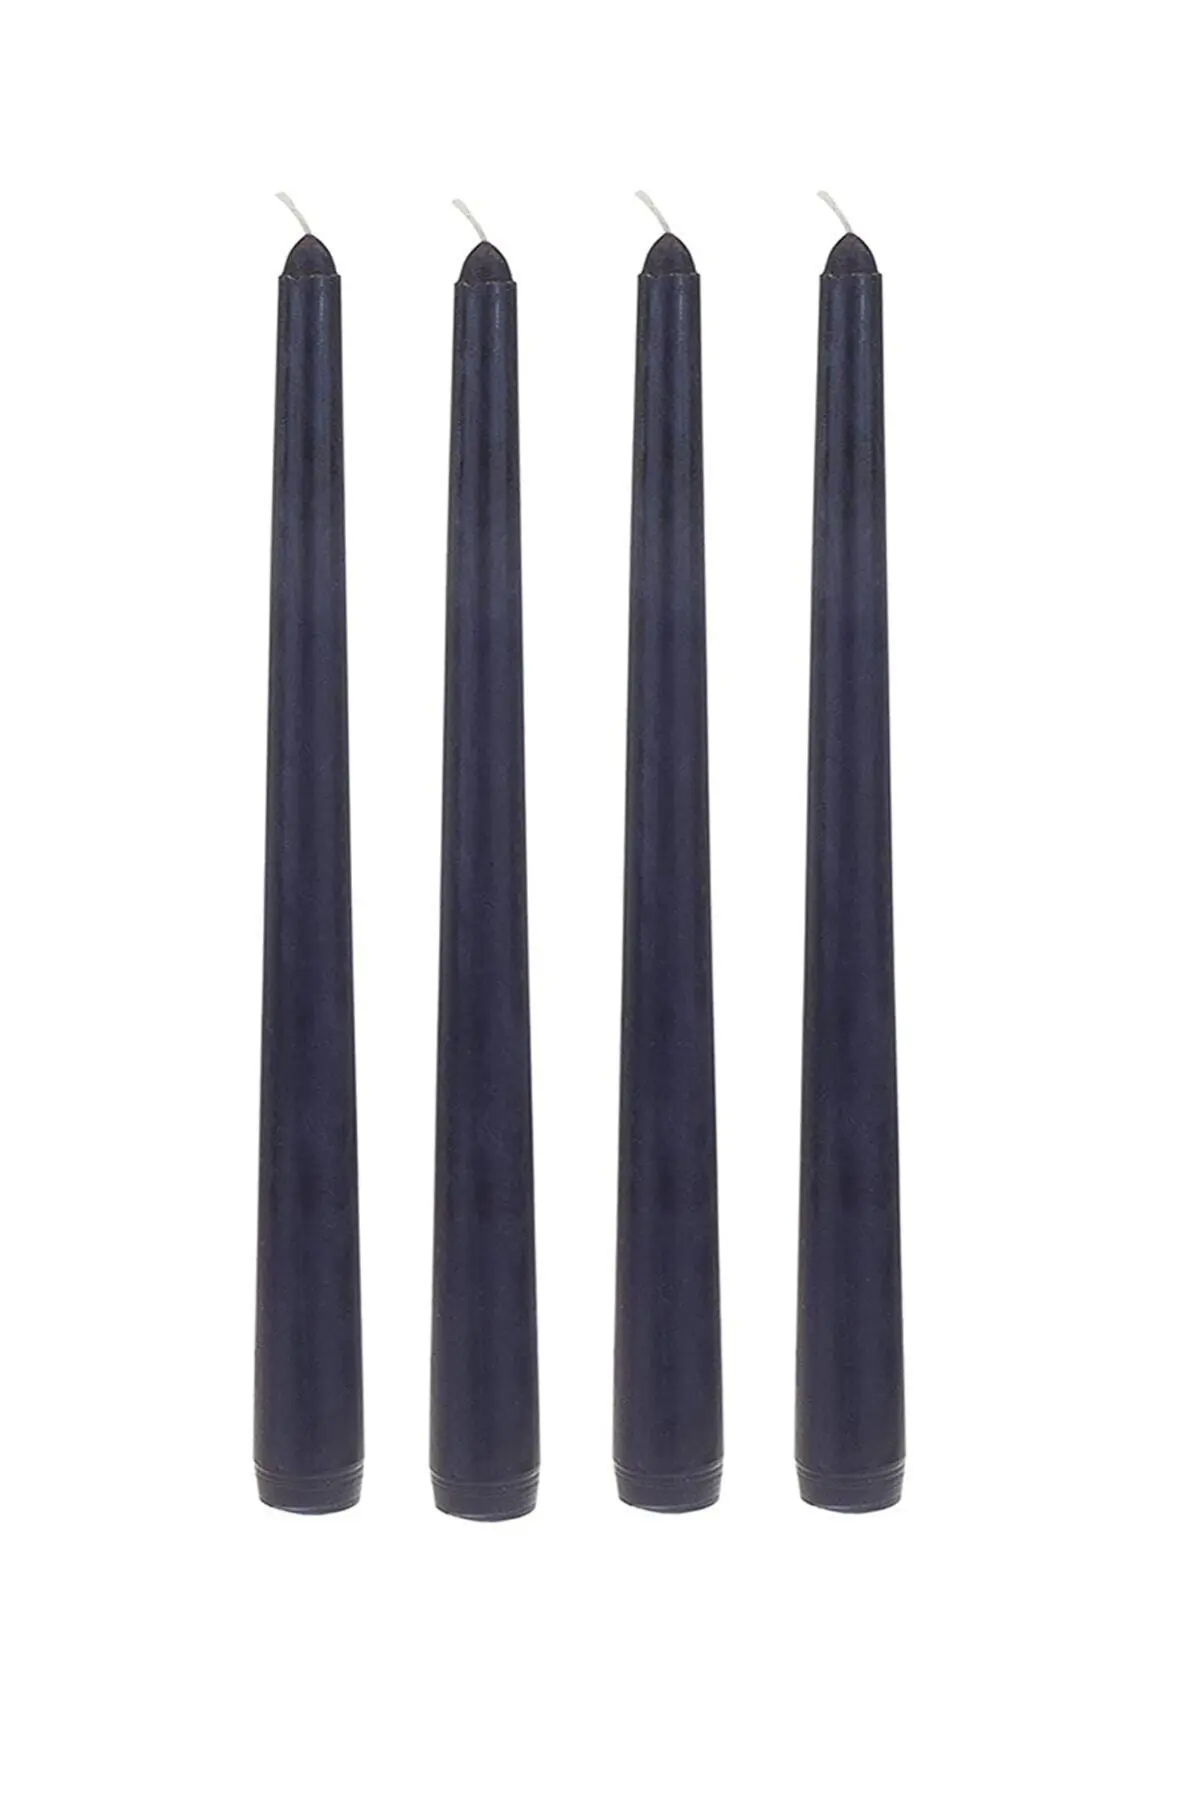 

4 Lu Black Taper Candlestick Candle Bridal Jewelry For Wedding Gift Candles Henna Night